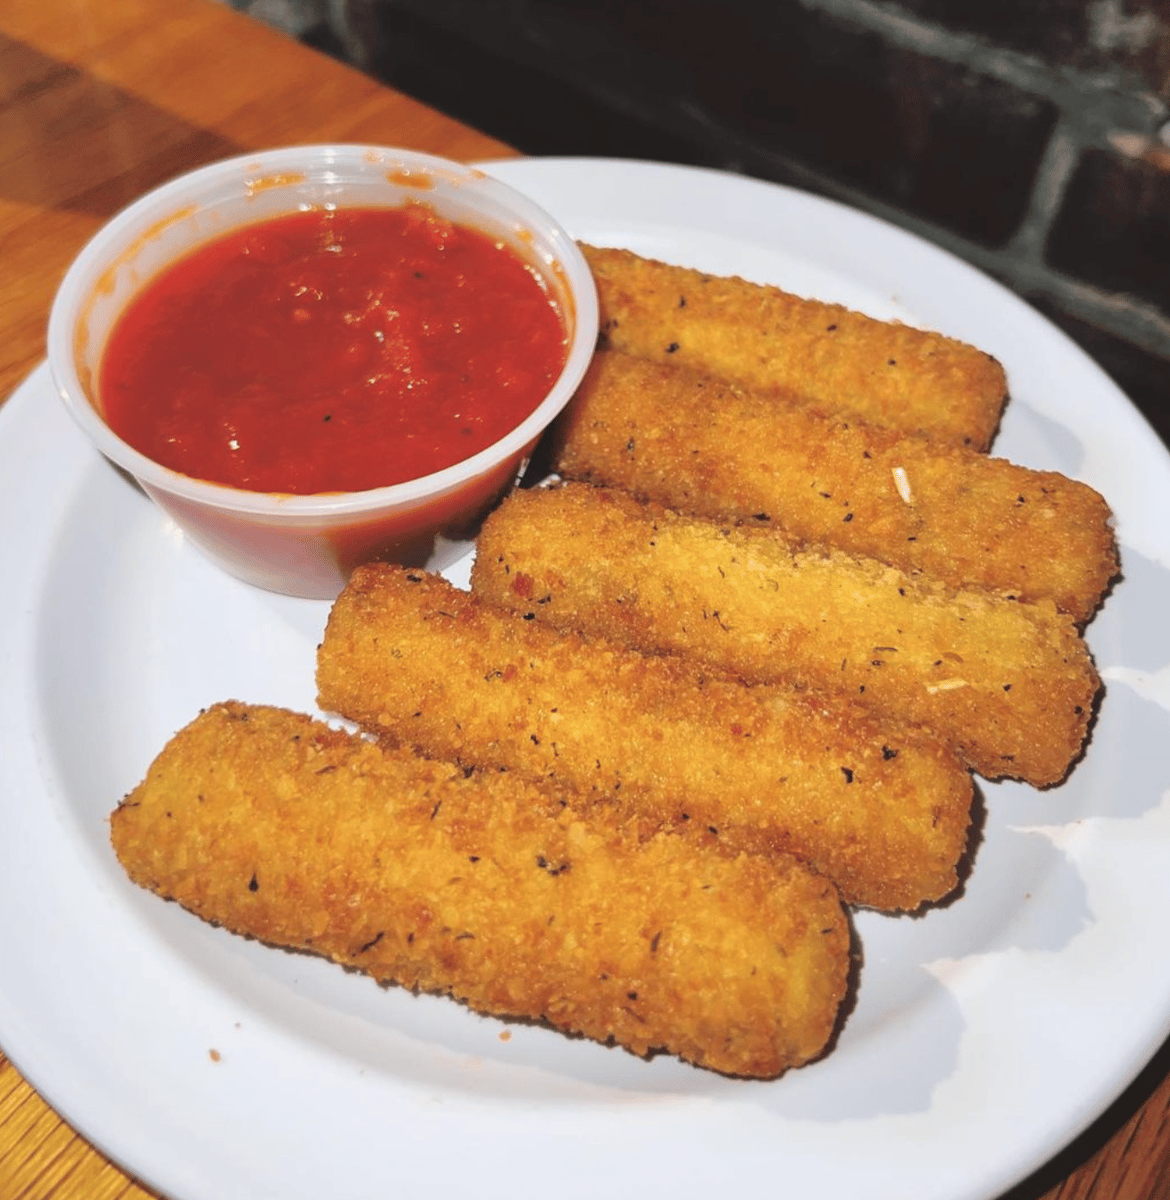 depositum lille kontrol Mozzarella Sticks Catering Tray - Catering - Giovani's Bar and Grill -  Restaurant in Center City Philadelphia, PA